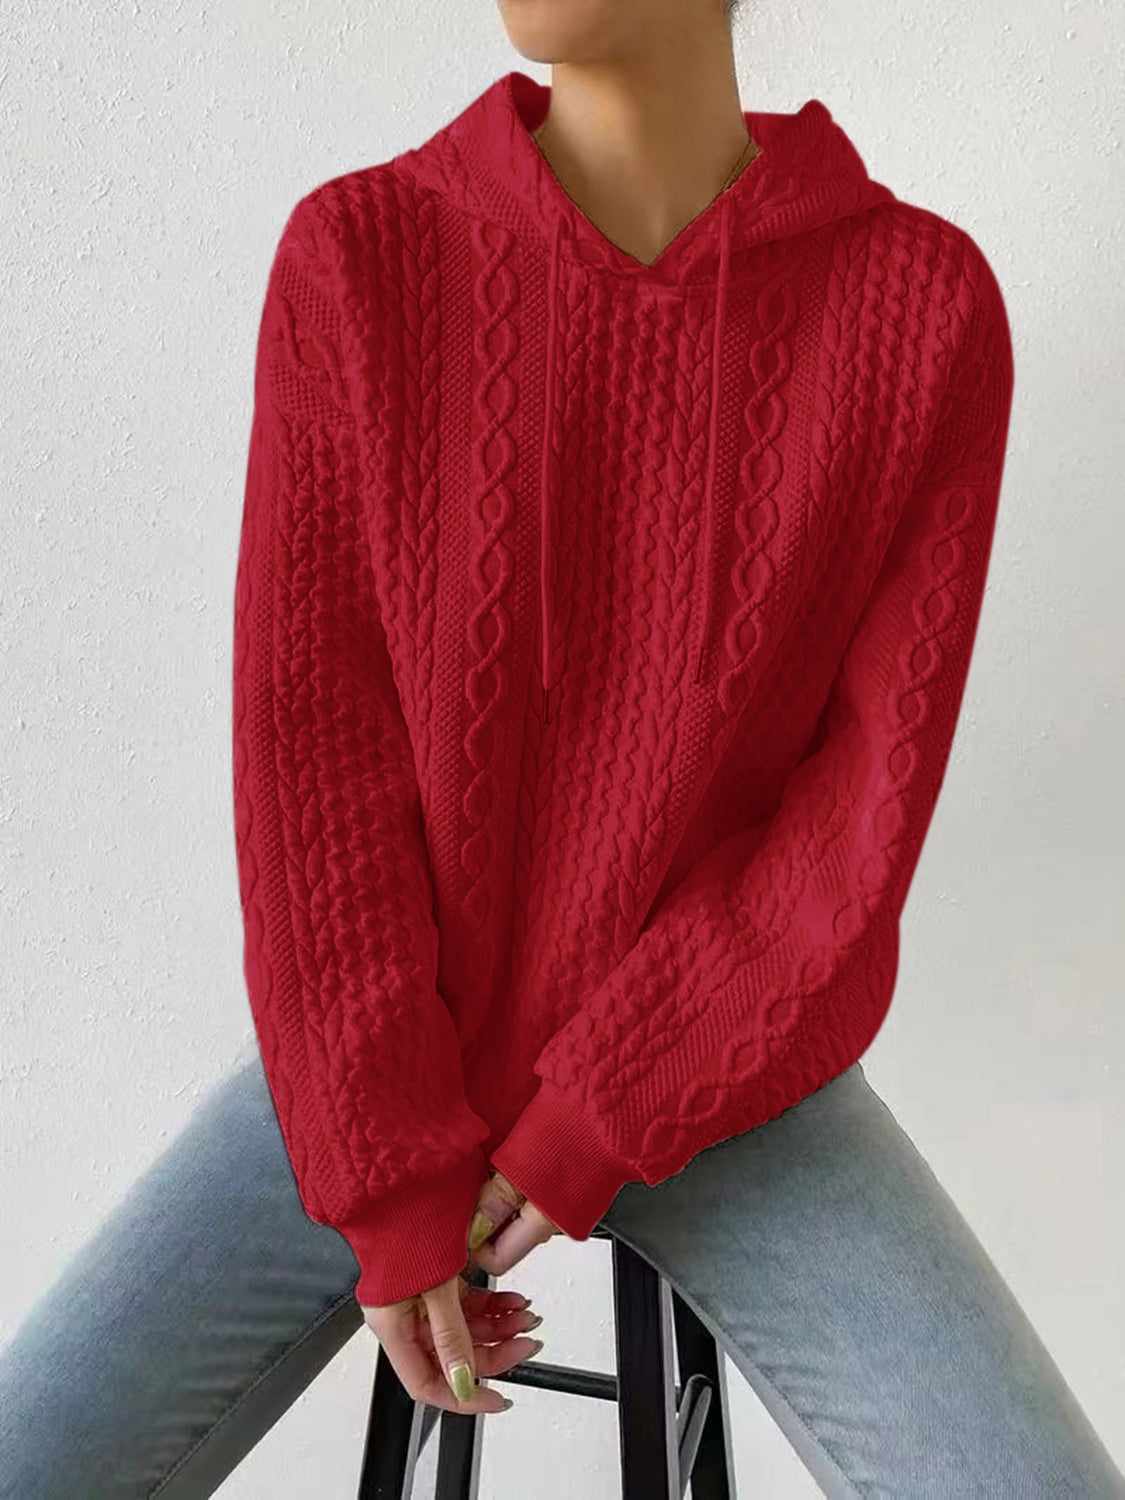 Textured Drawstring Long Sleeve Hoodie - Red / M - Women’s Clothing & Accessories - Shirts & Tops - 24 - 2024